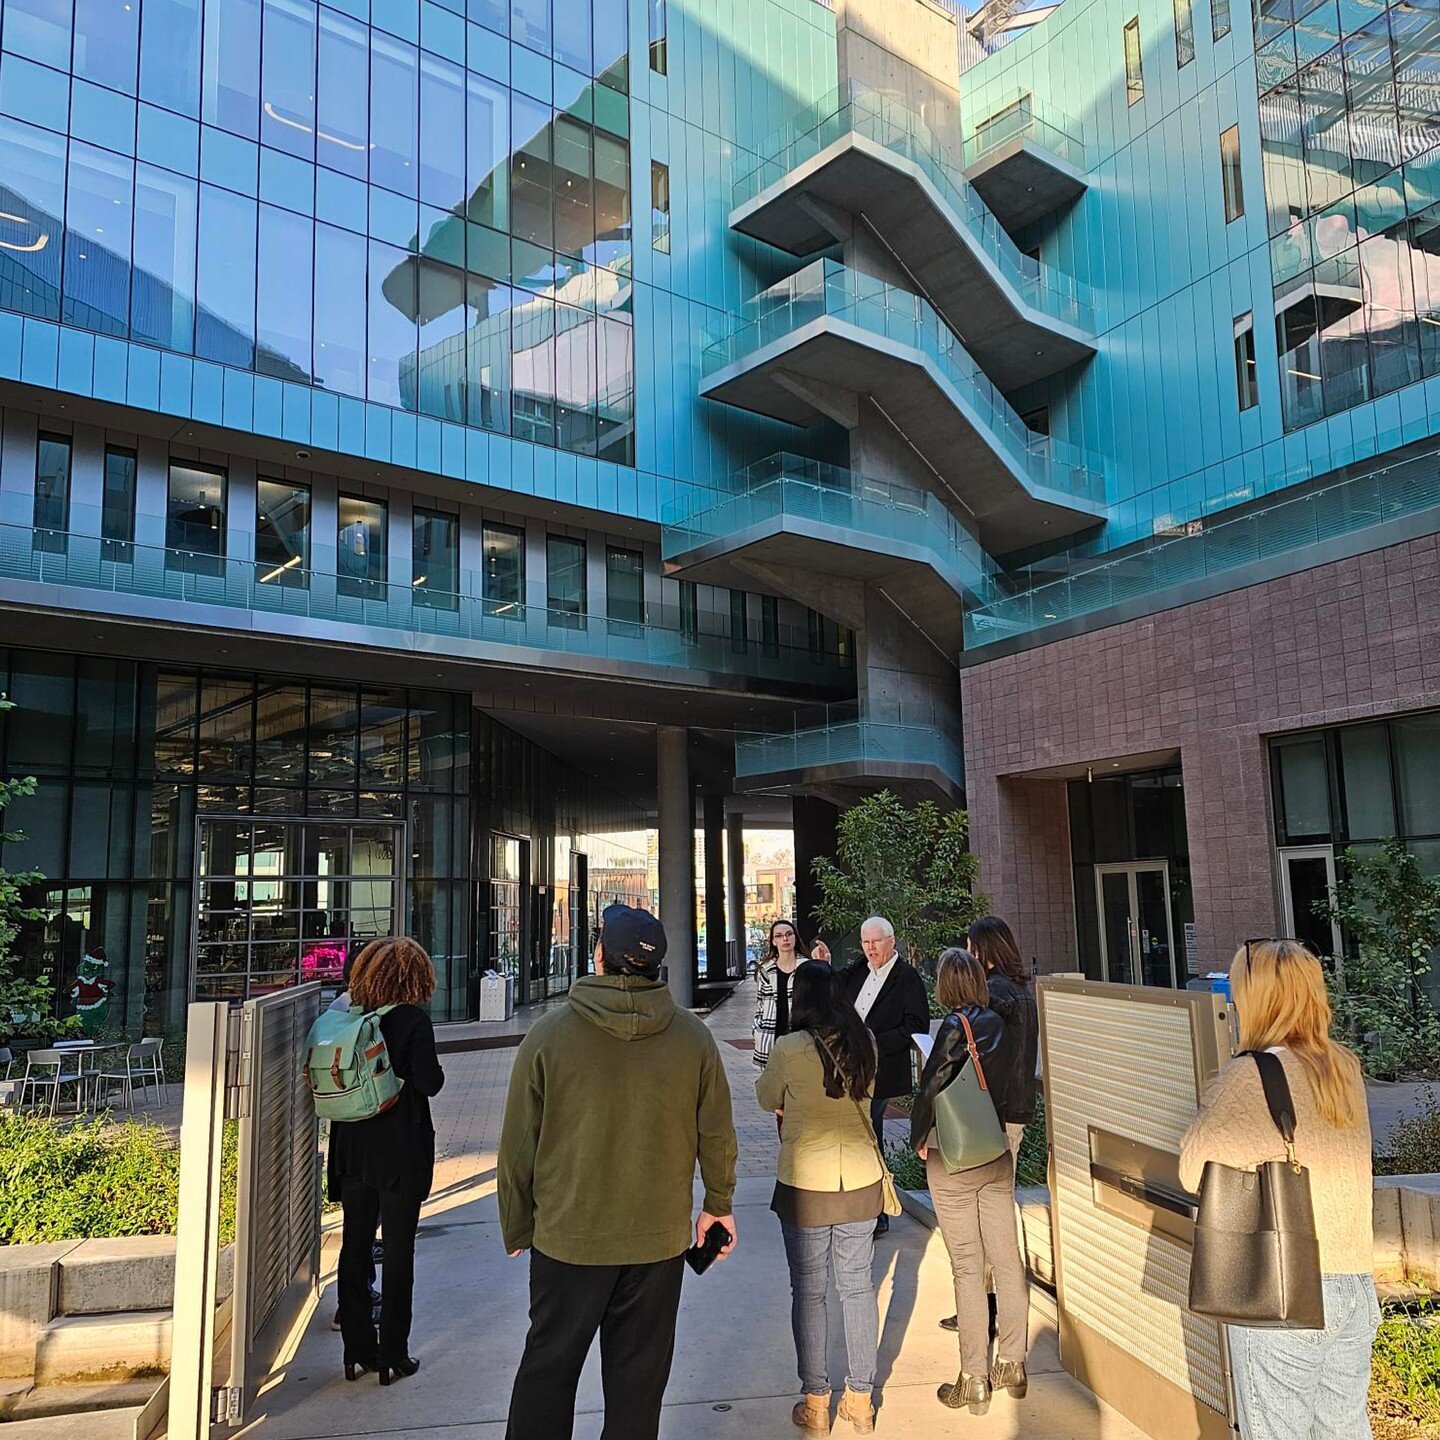 This past weekend, we were honored to lead a tour hosted by @noma.arizona of the ASU Walton Center for Planetary Health. Thank to all who were involved in organizing this event, we had an excellent turnout!

Swipe through for imagery taken during the